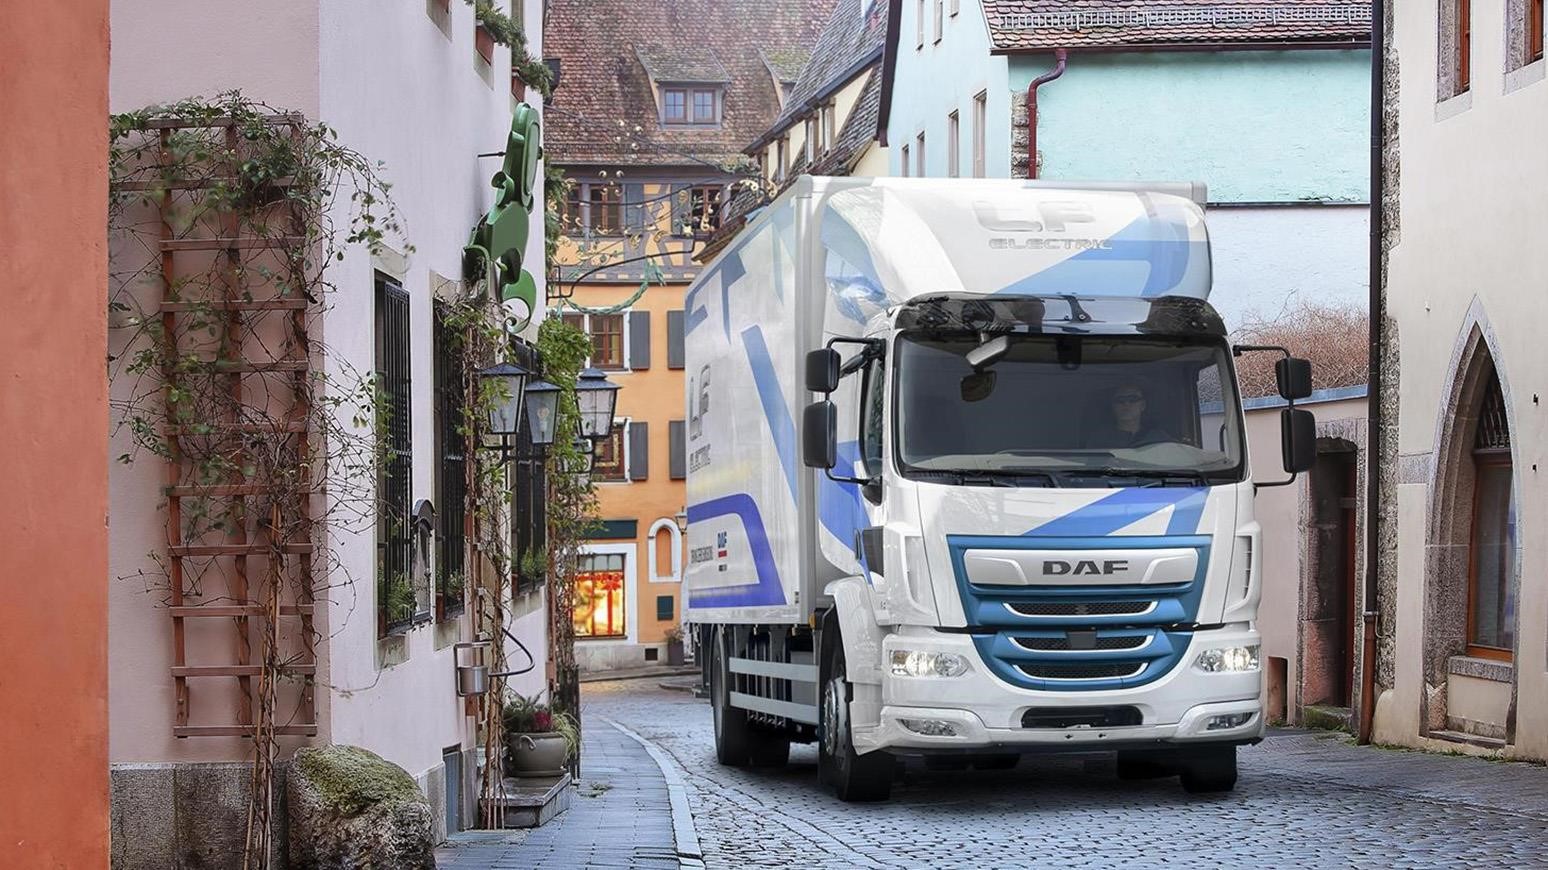 20 DAF LF Electric Trucks Involved In One Of The Largest, Most Significant Battery-Electric Deployments To Date